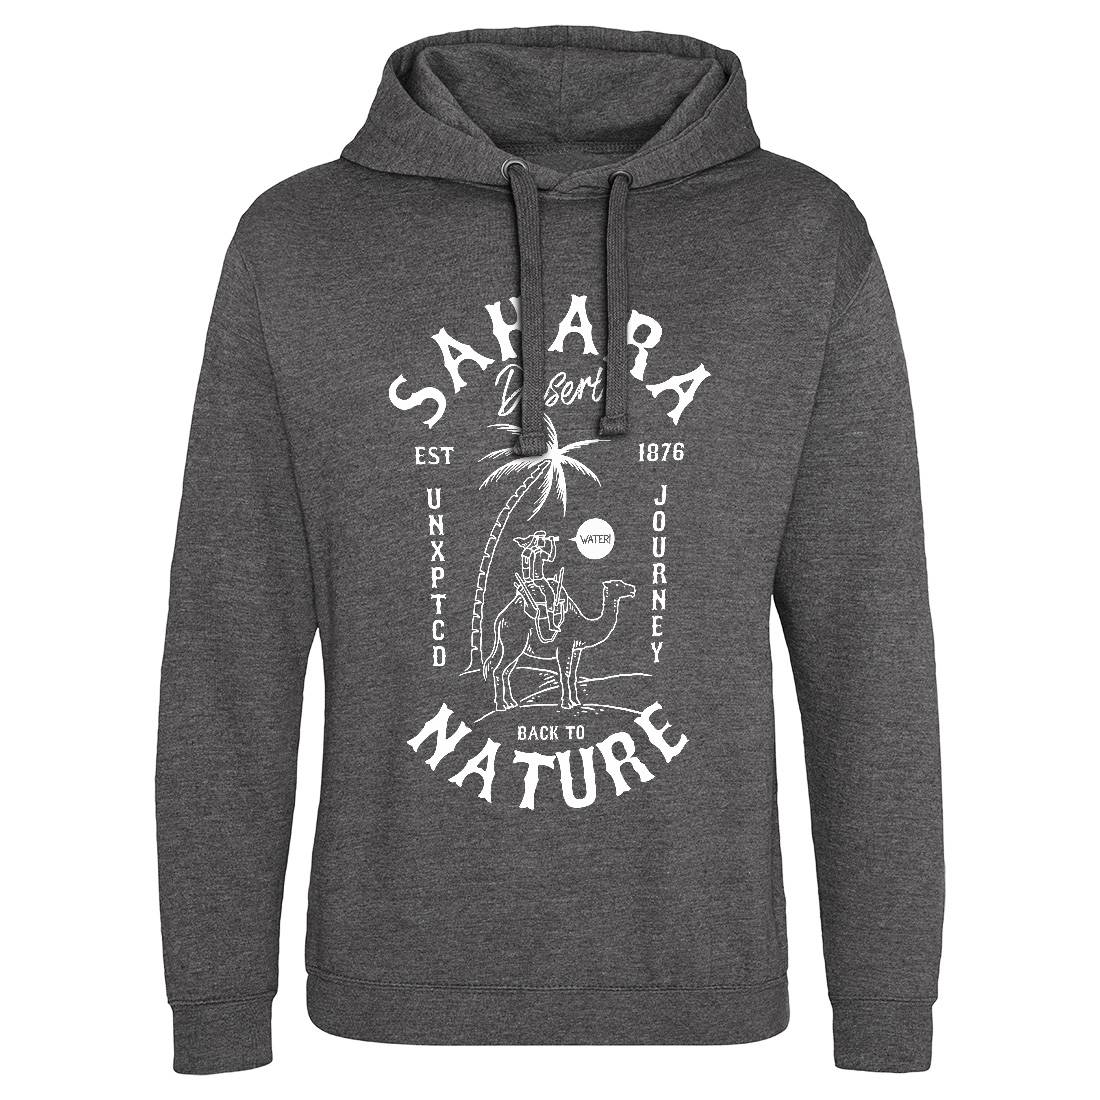 Desert Mens Hoodie Without Pocket Nature C722